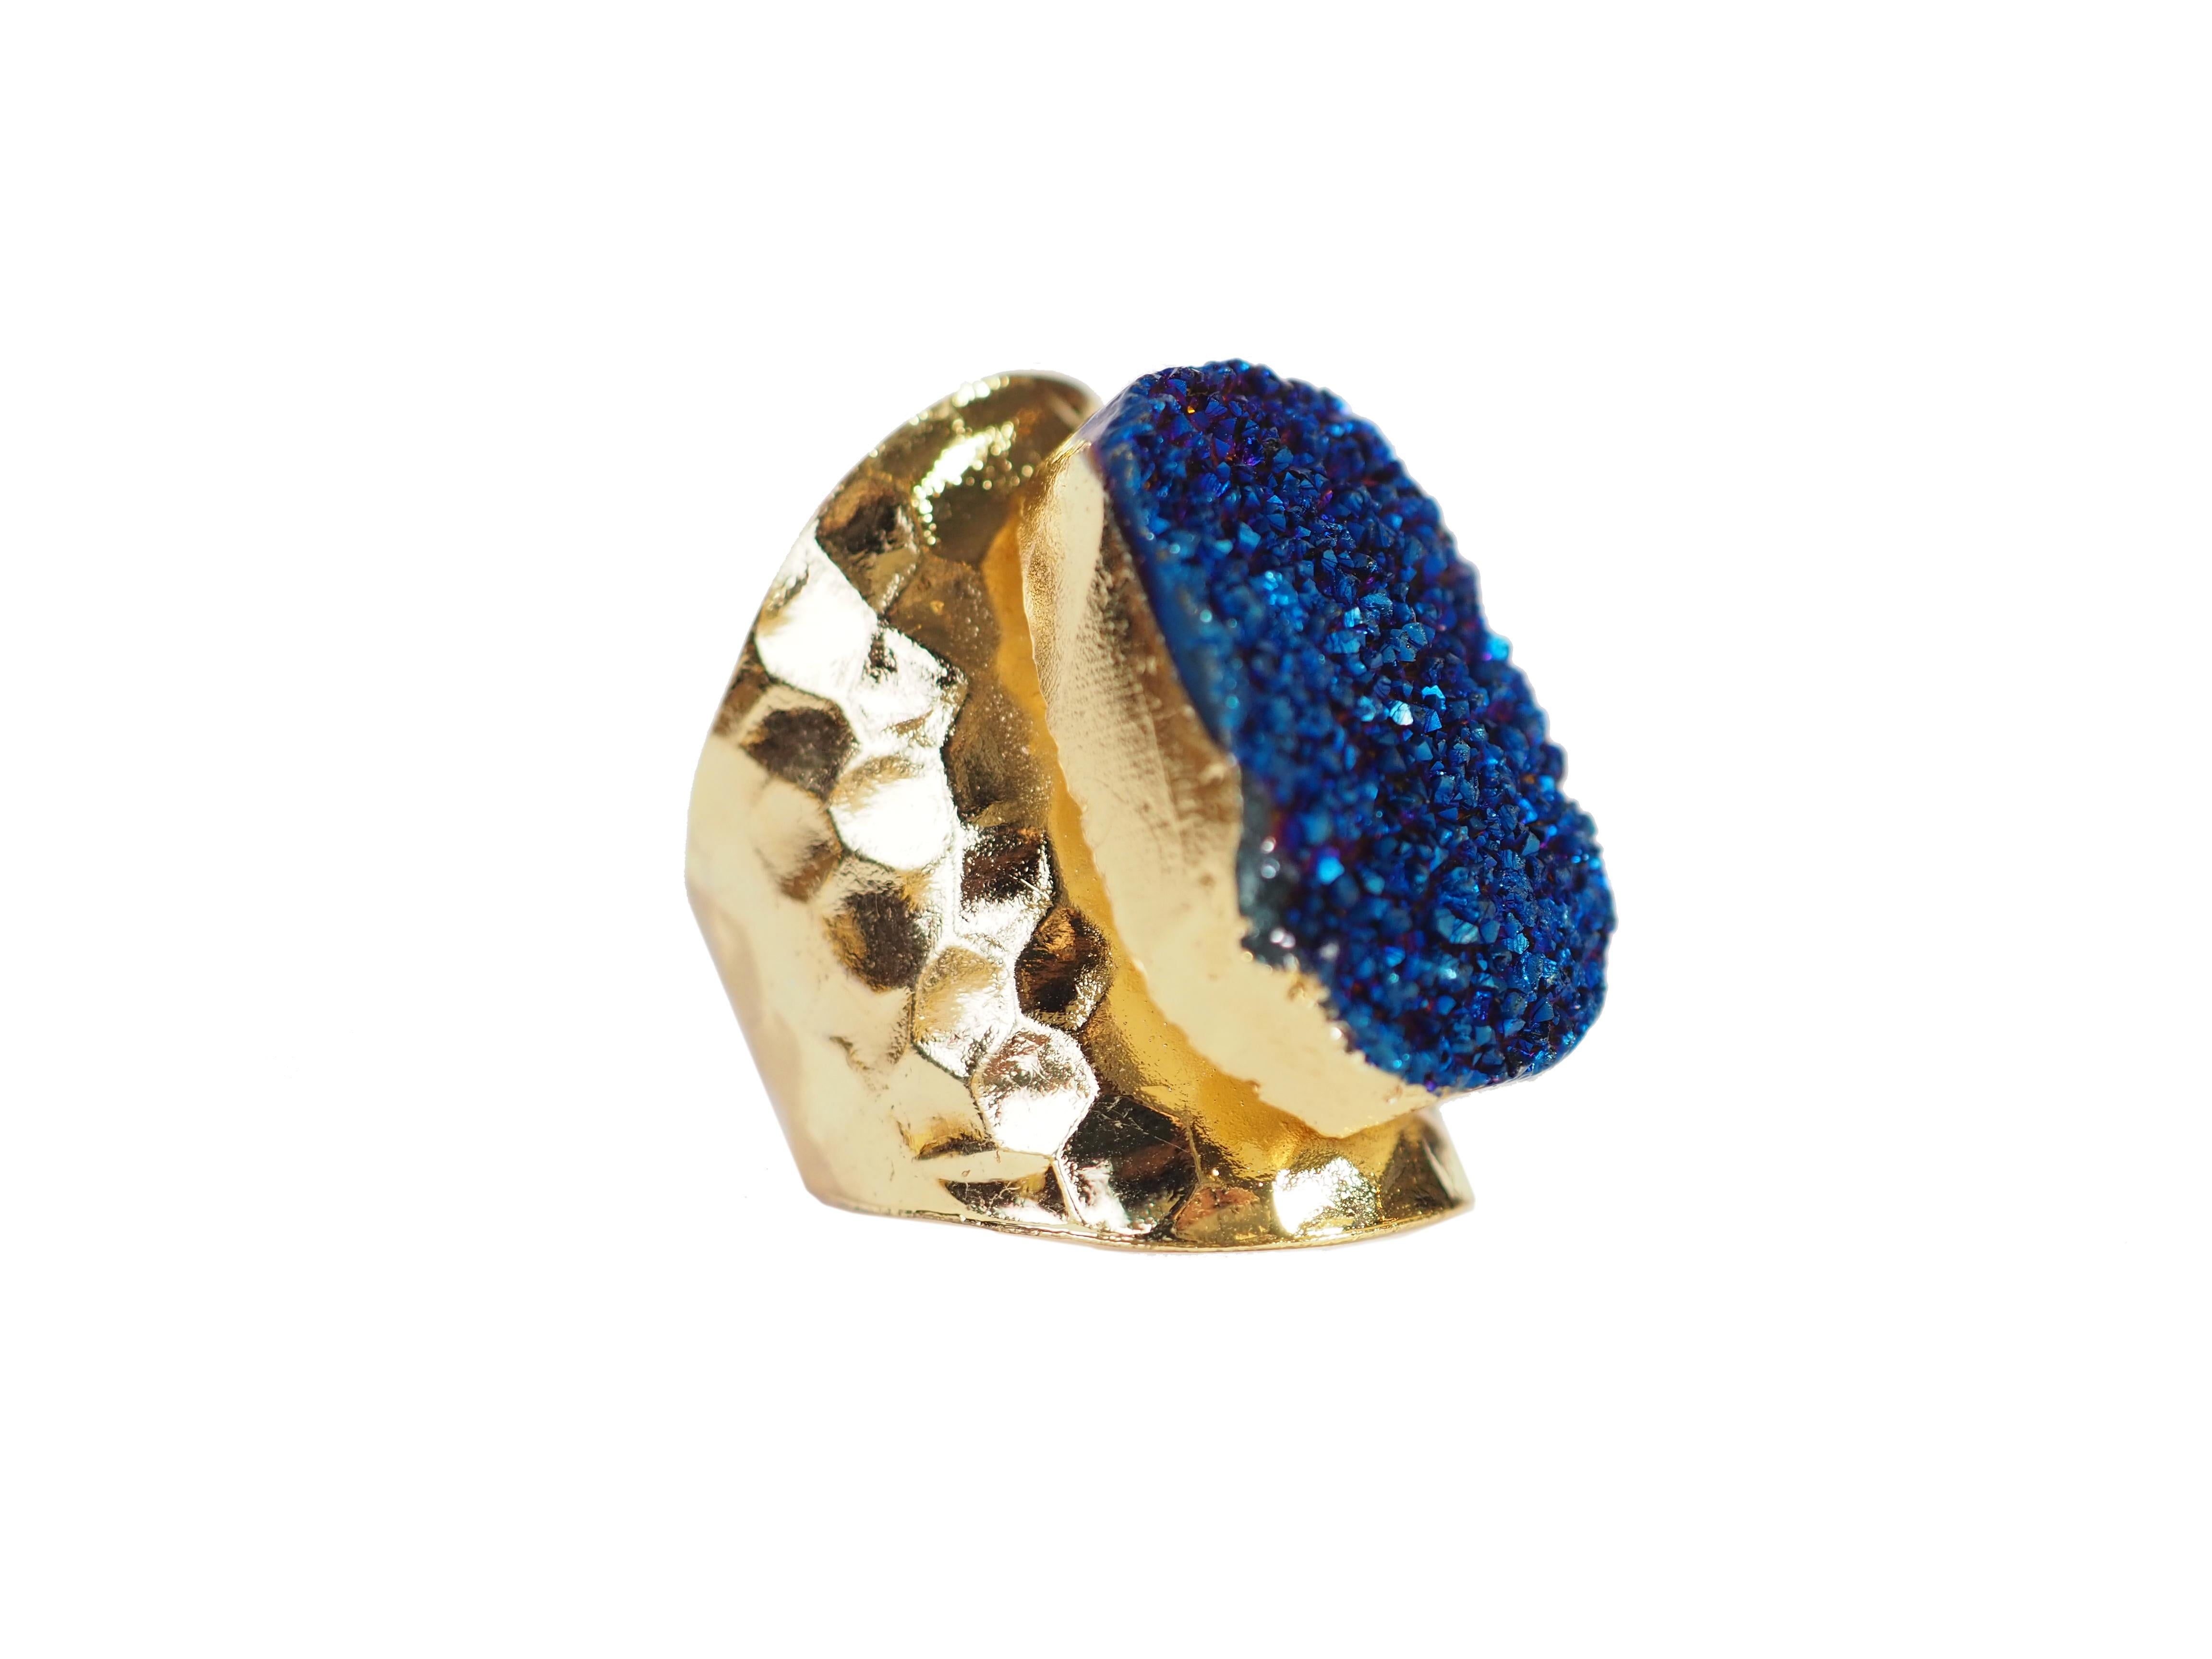 Hand made druzy ring with crystal blu agate, bronze, gold plated, size 14 adjustable.
All Giulia Colussi jewelry is new and has never been previously owned or worn. Each item will arrive at your door beautifully gift wrapped in our boxes, put inside